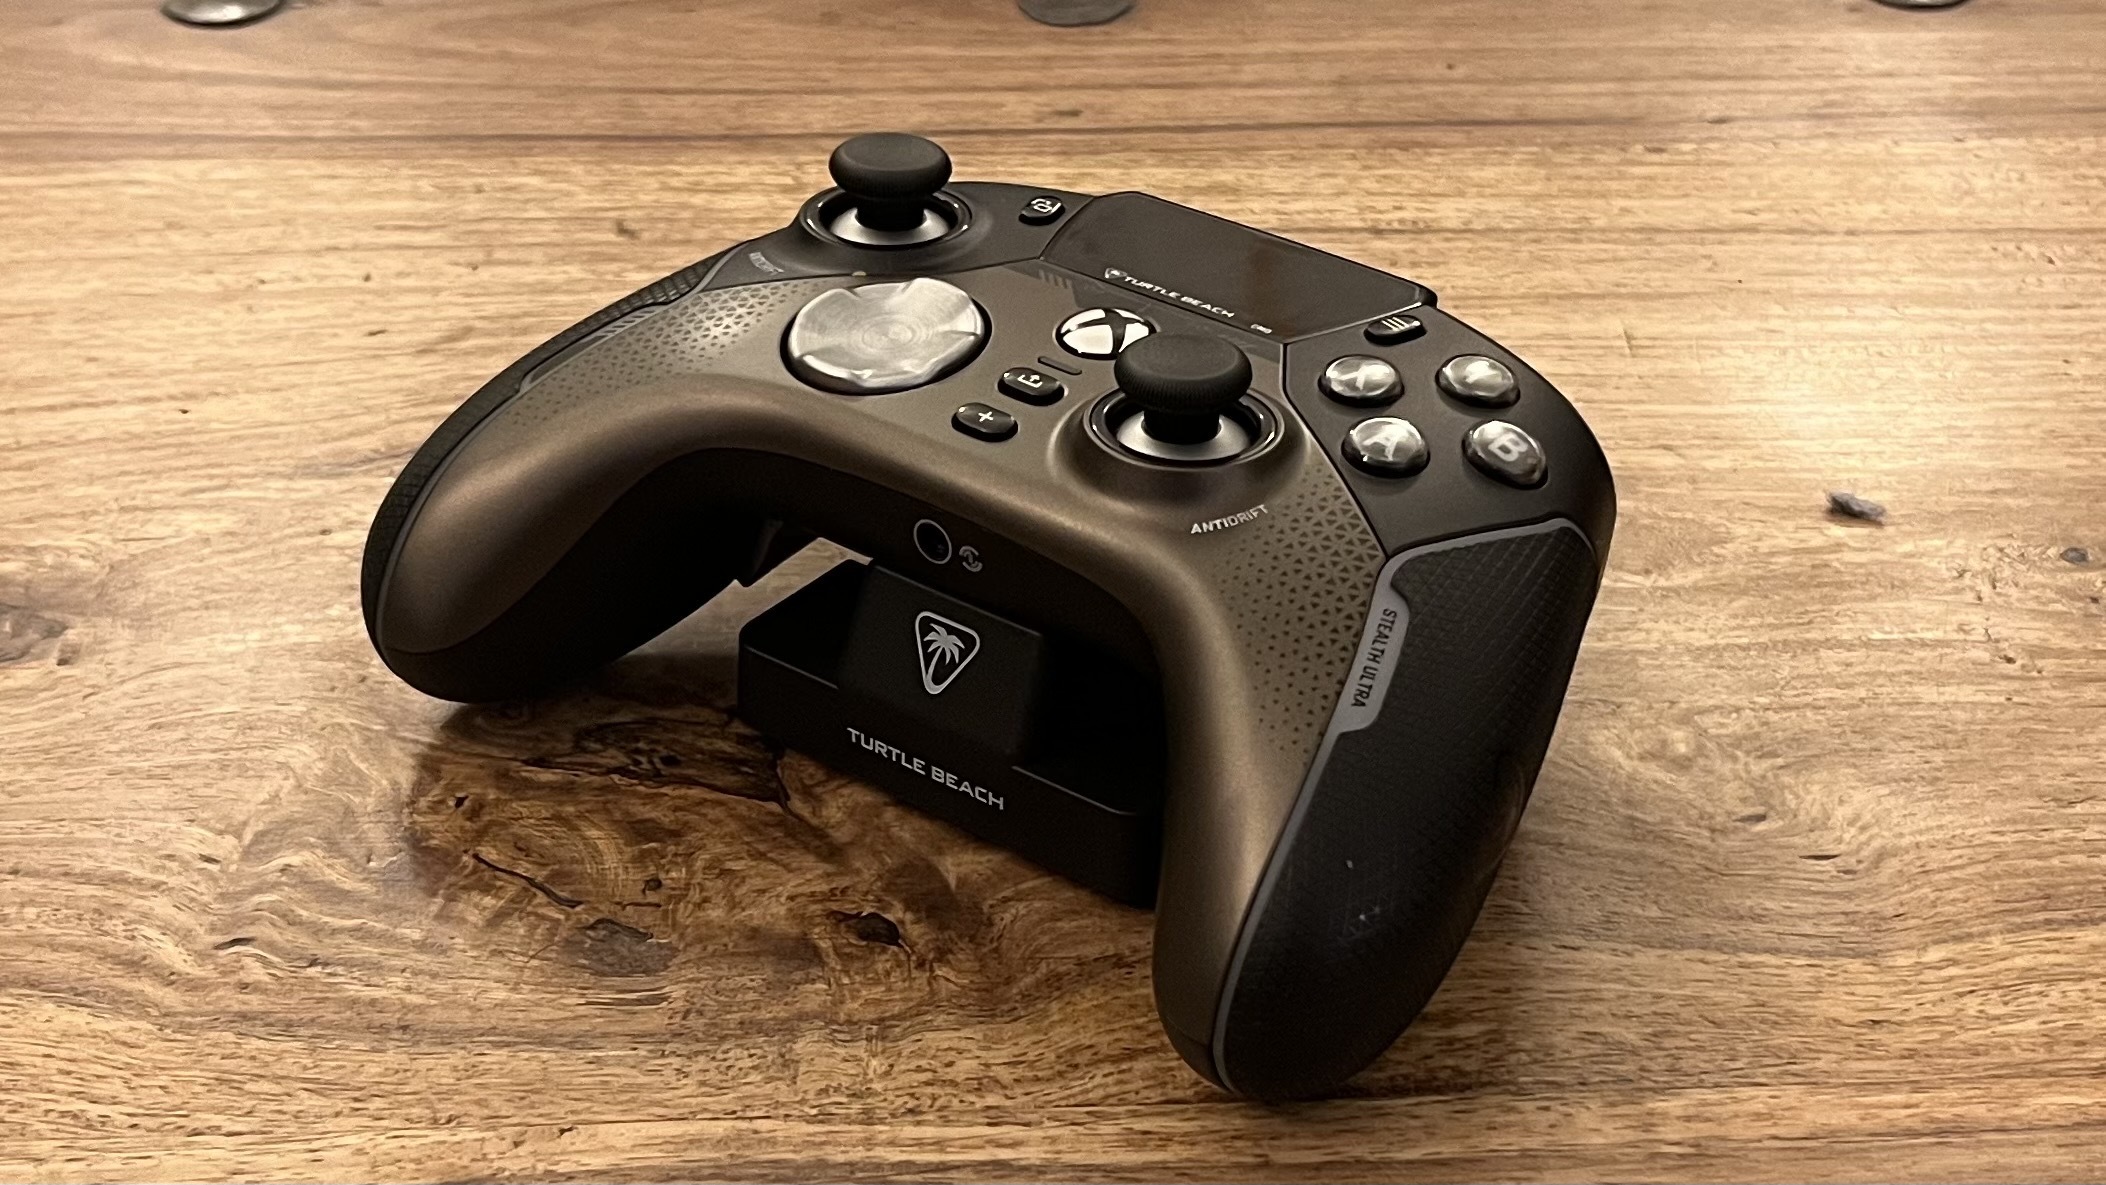 The Turtle Beach Stealth Ultra Is A Pro Controller With A Full Colour Screen